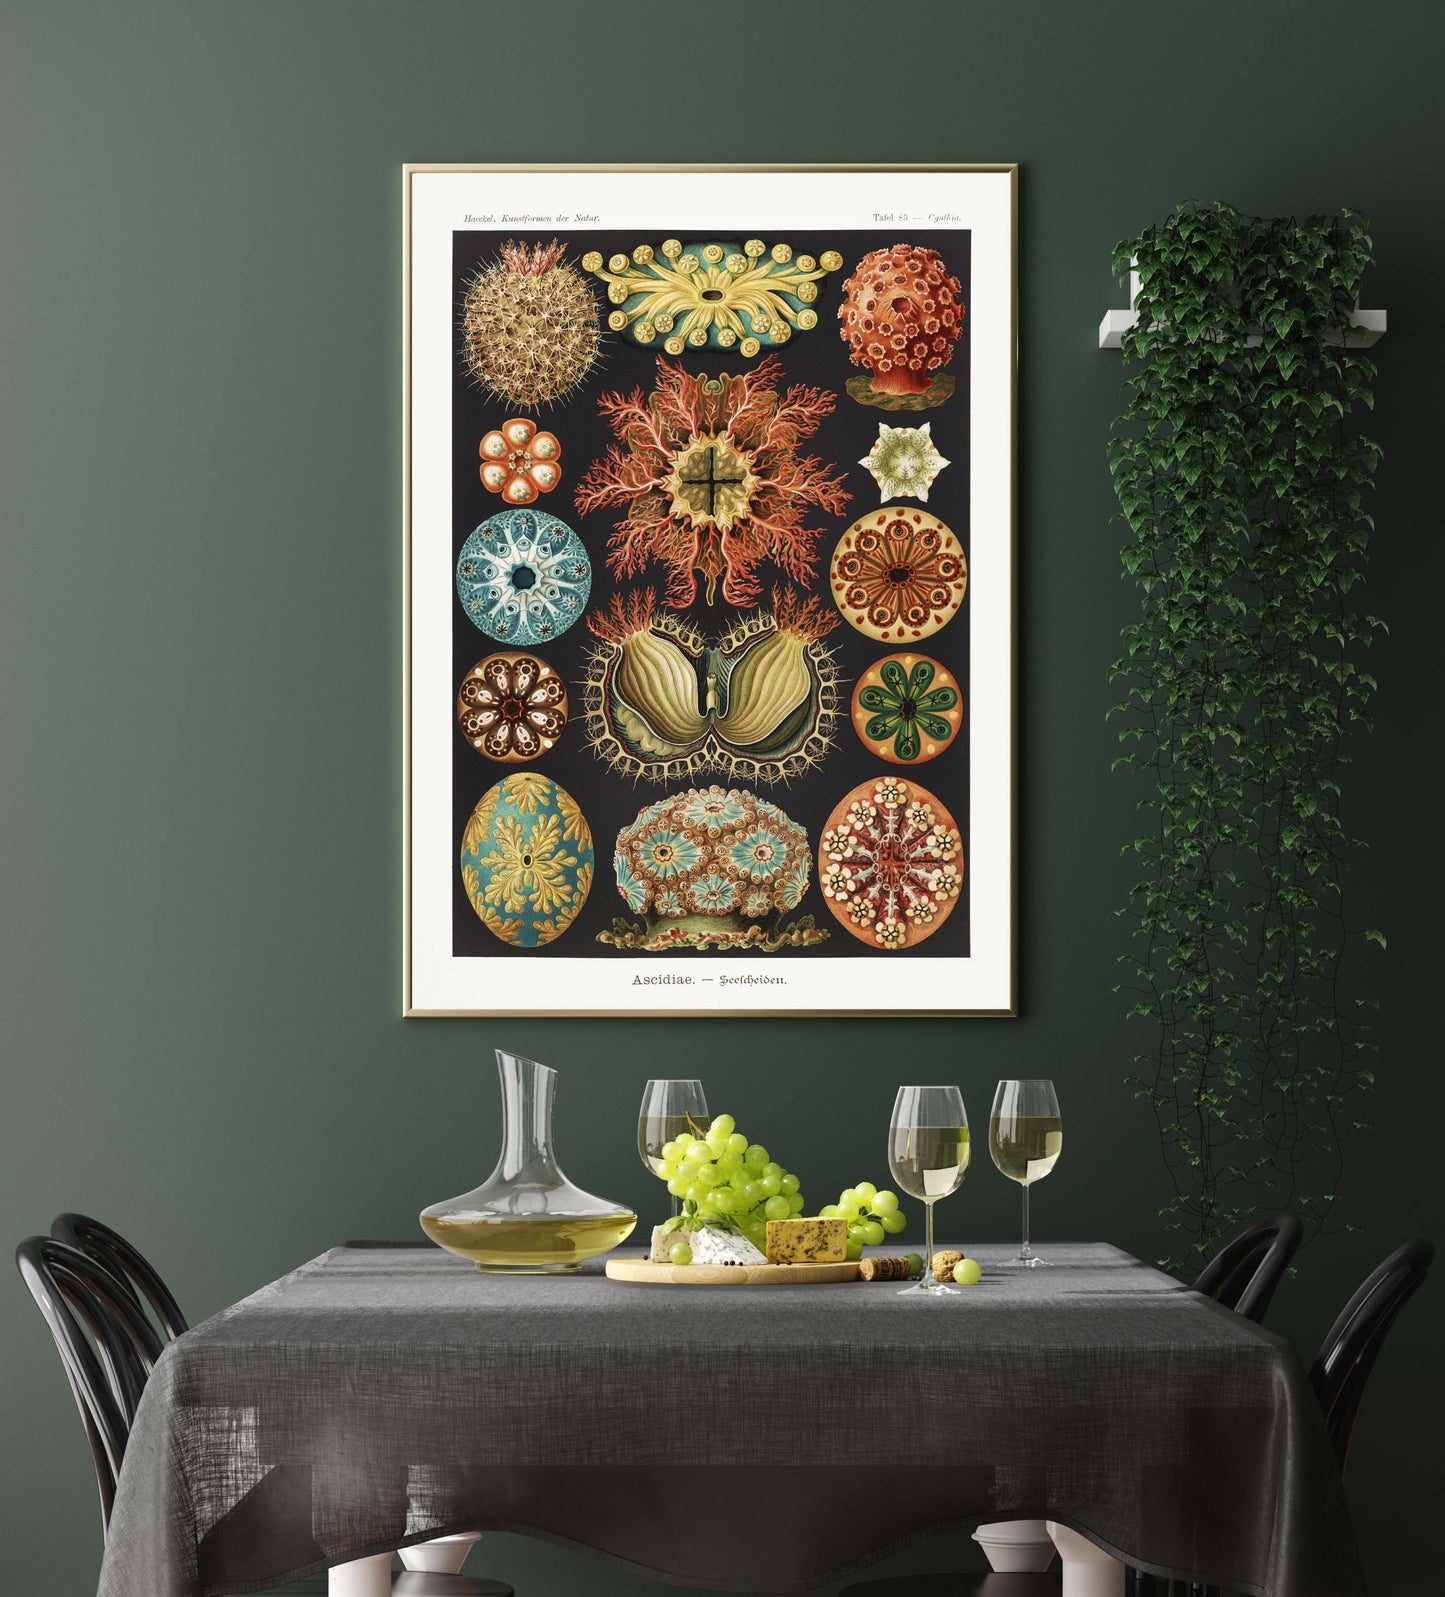 Ernst Haeckel Wall Art - Ascidiae Colourful Corals Embryology by Ernst Haeckel Poster with borders